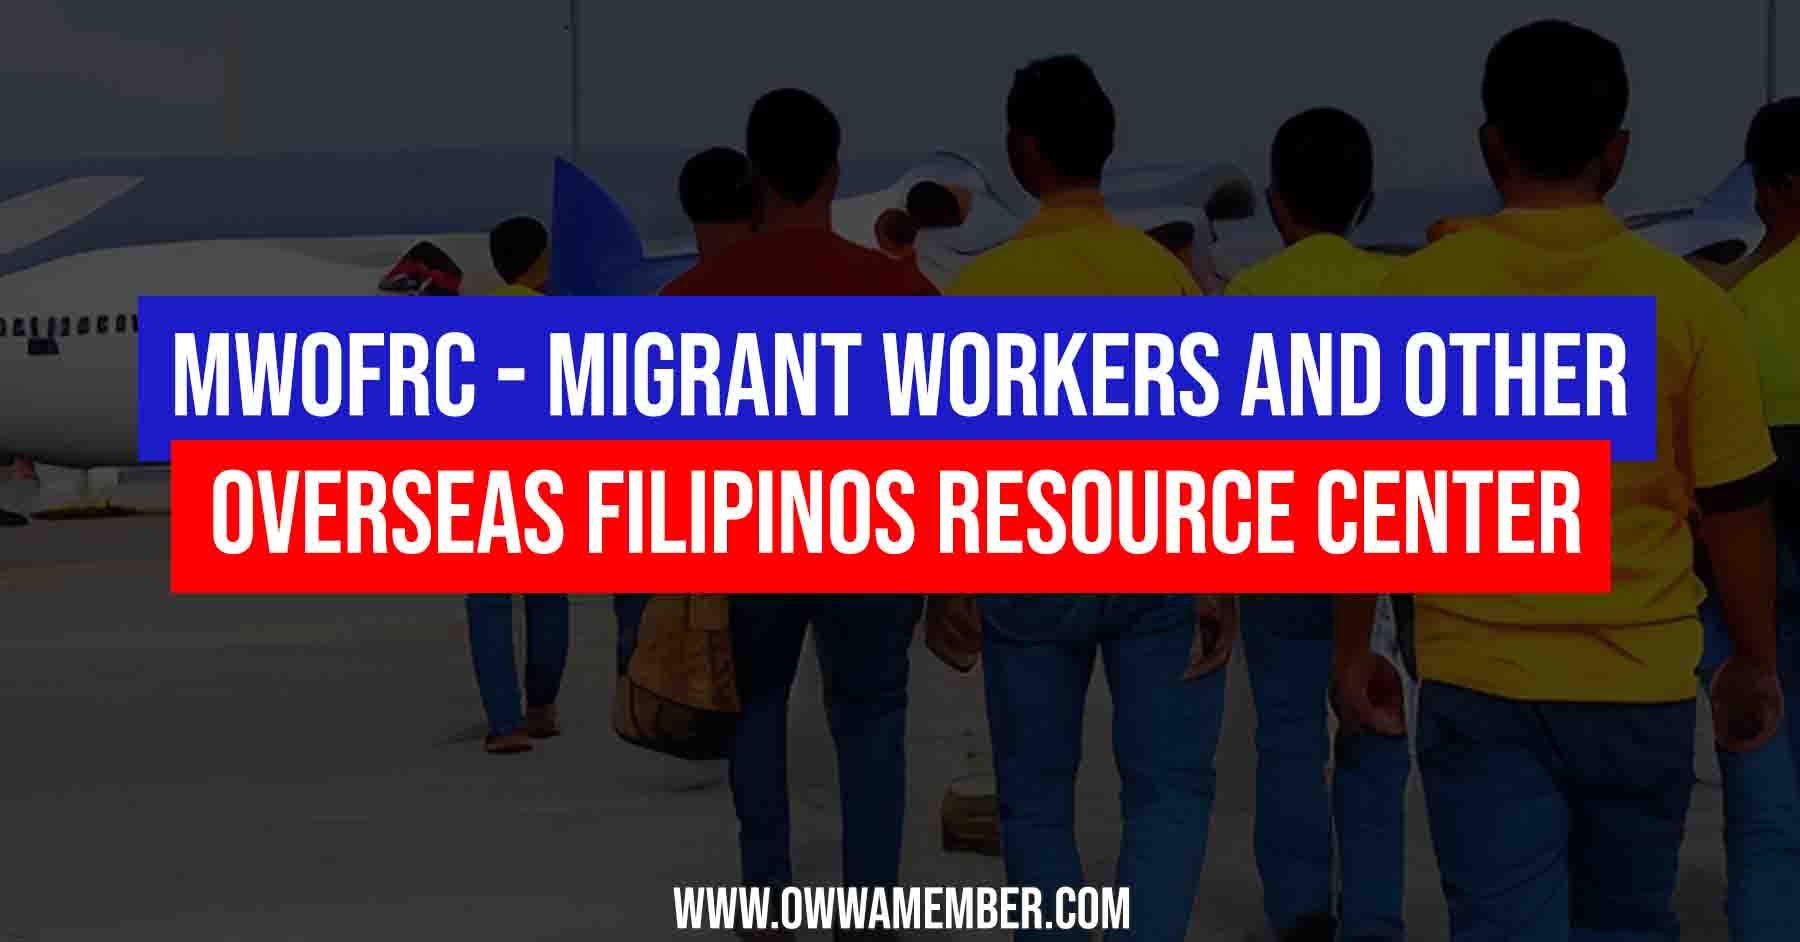 MWOFRC - Migrant Workers and Other Overseas Filipinos Resource Center